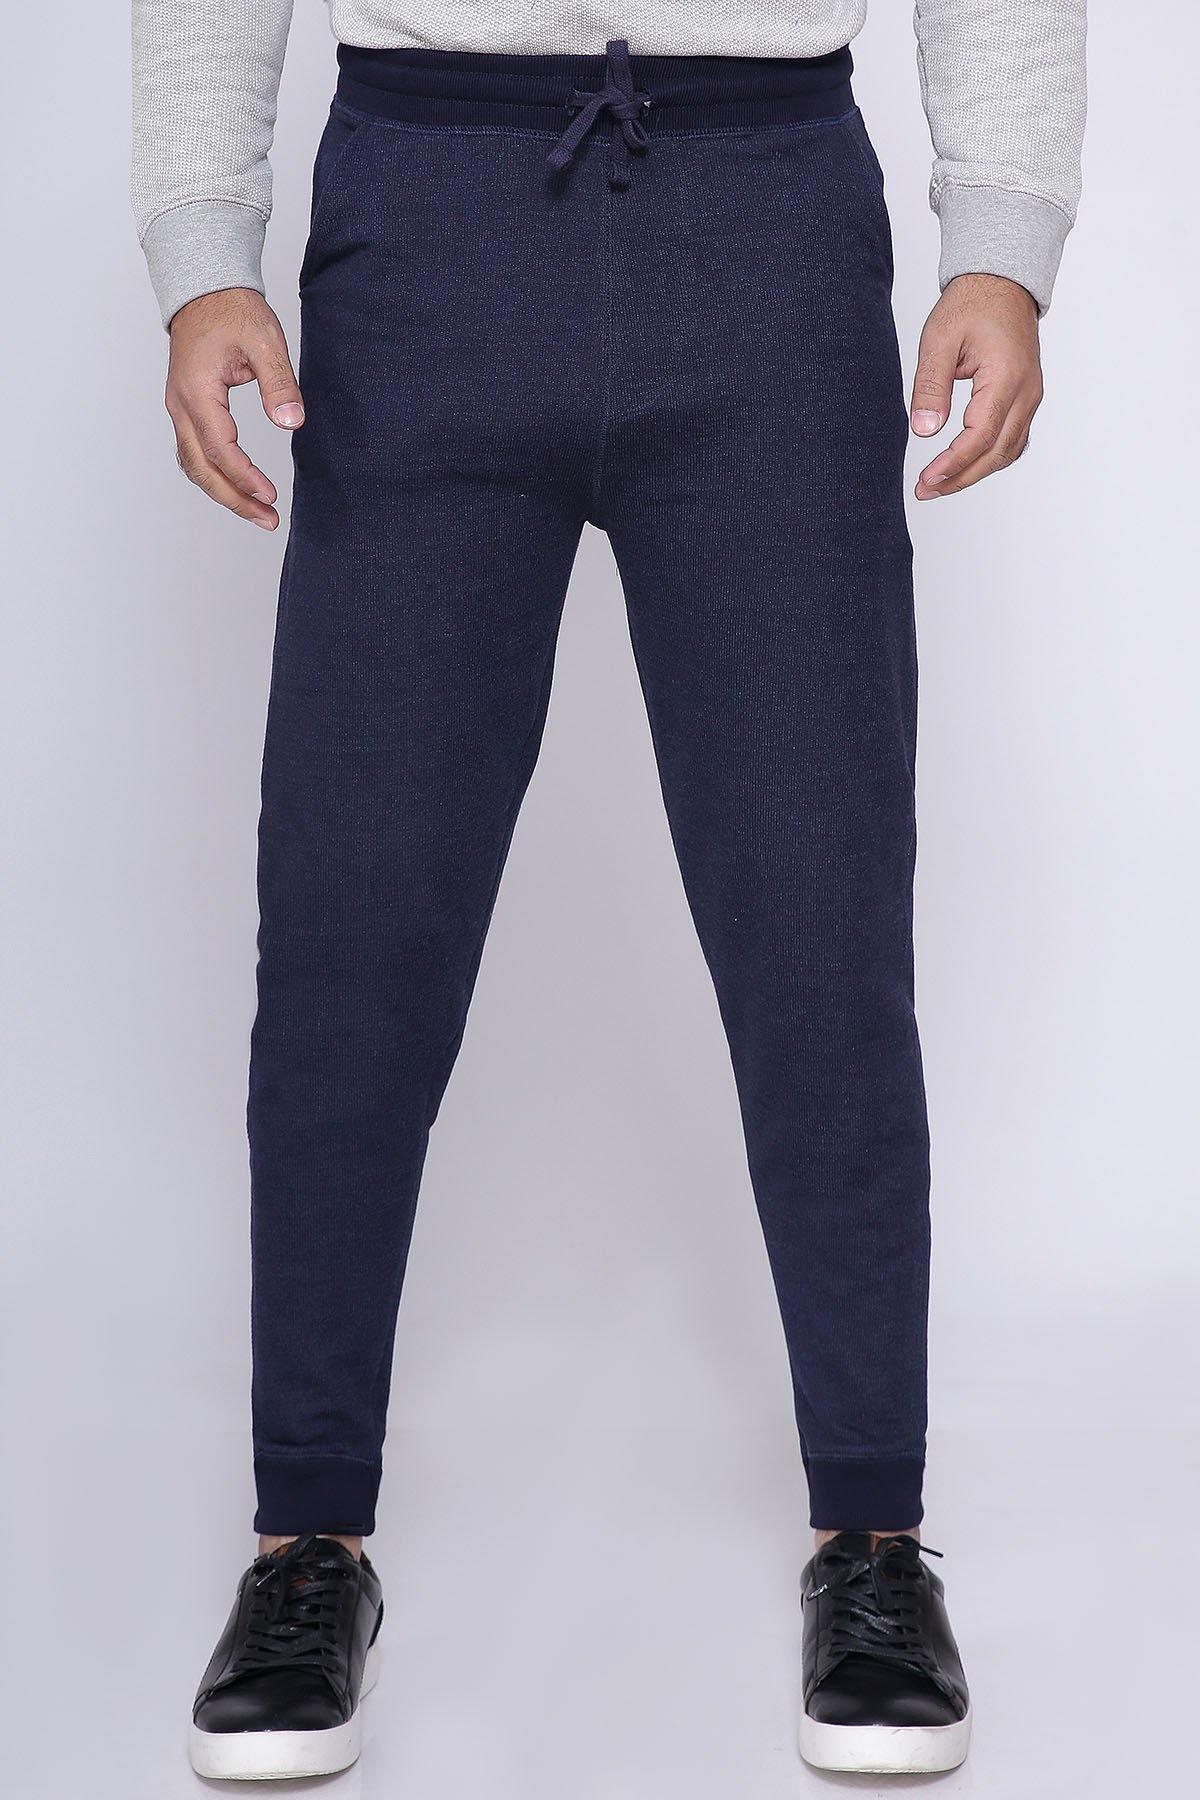 CHAIN YARN TROUSER NAVY at Charcoal Clothing